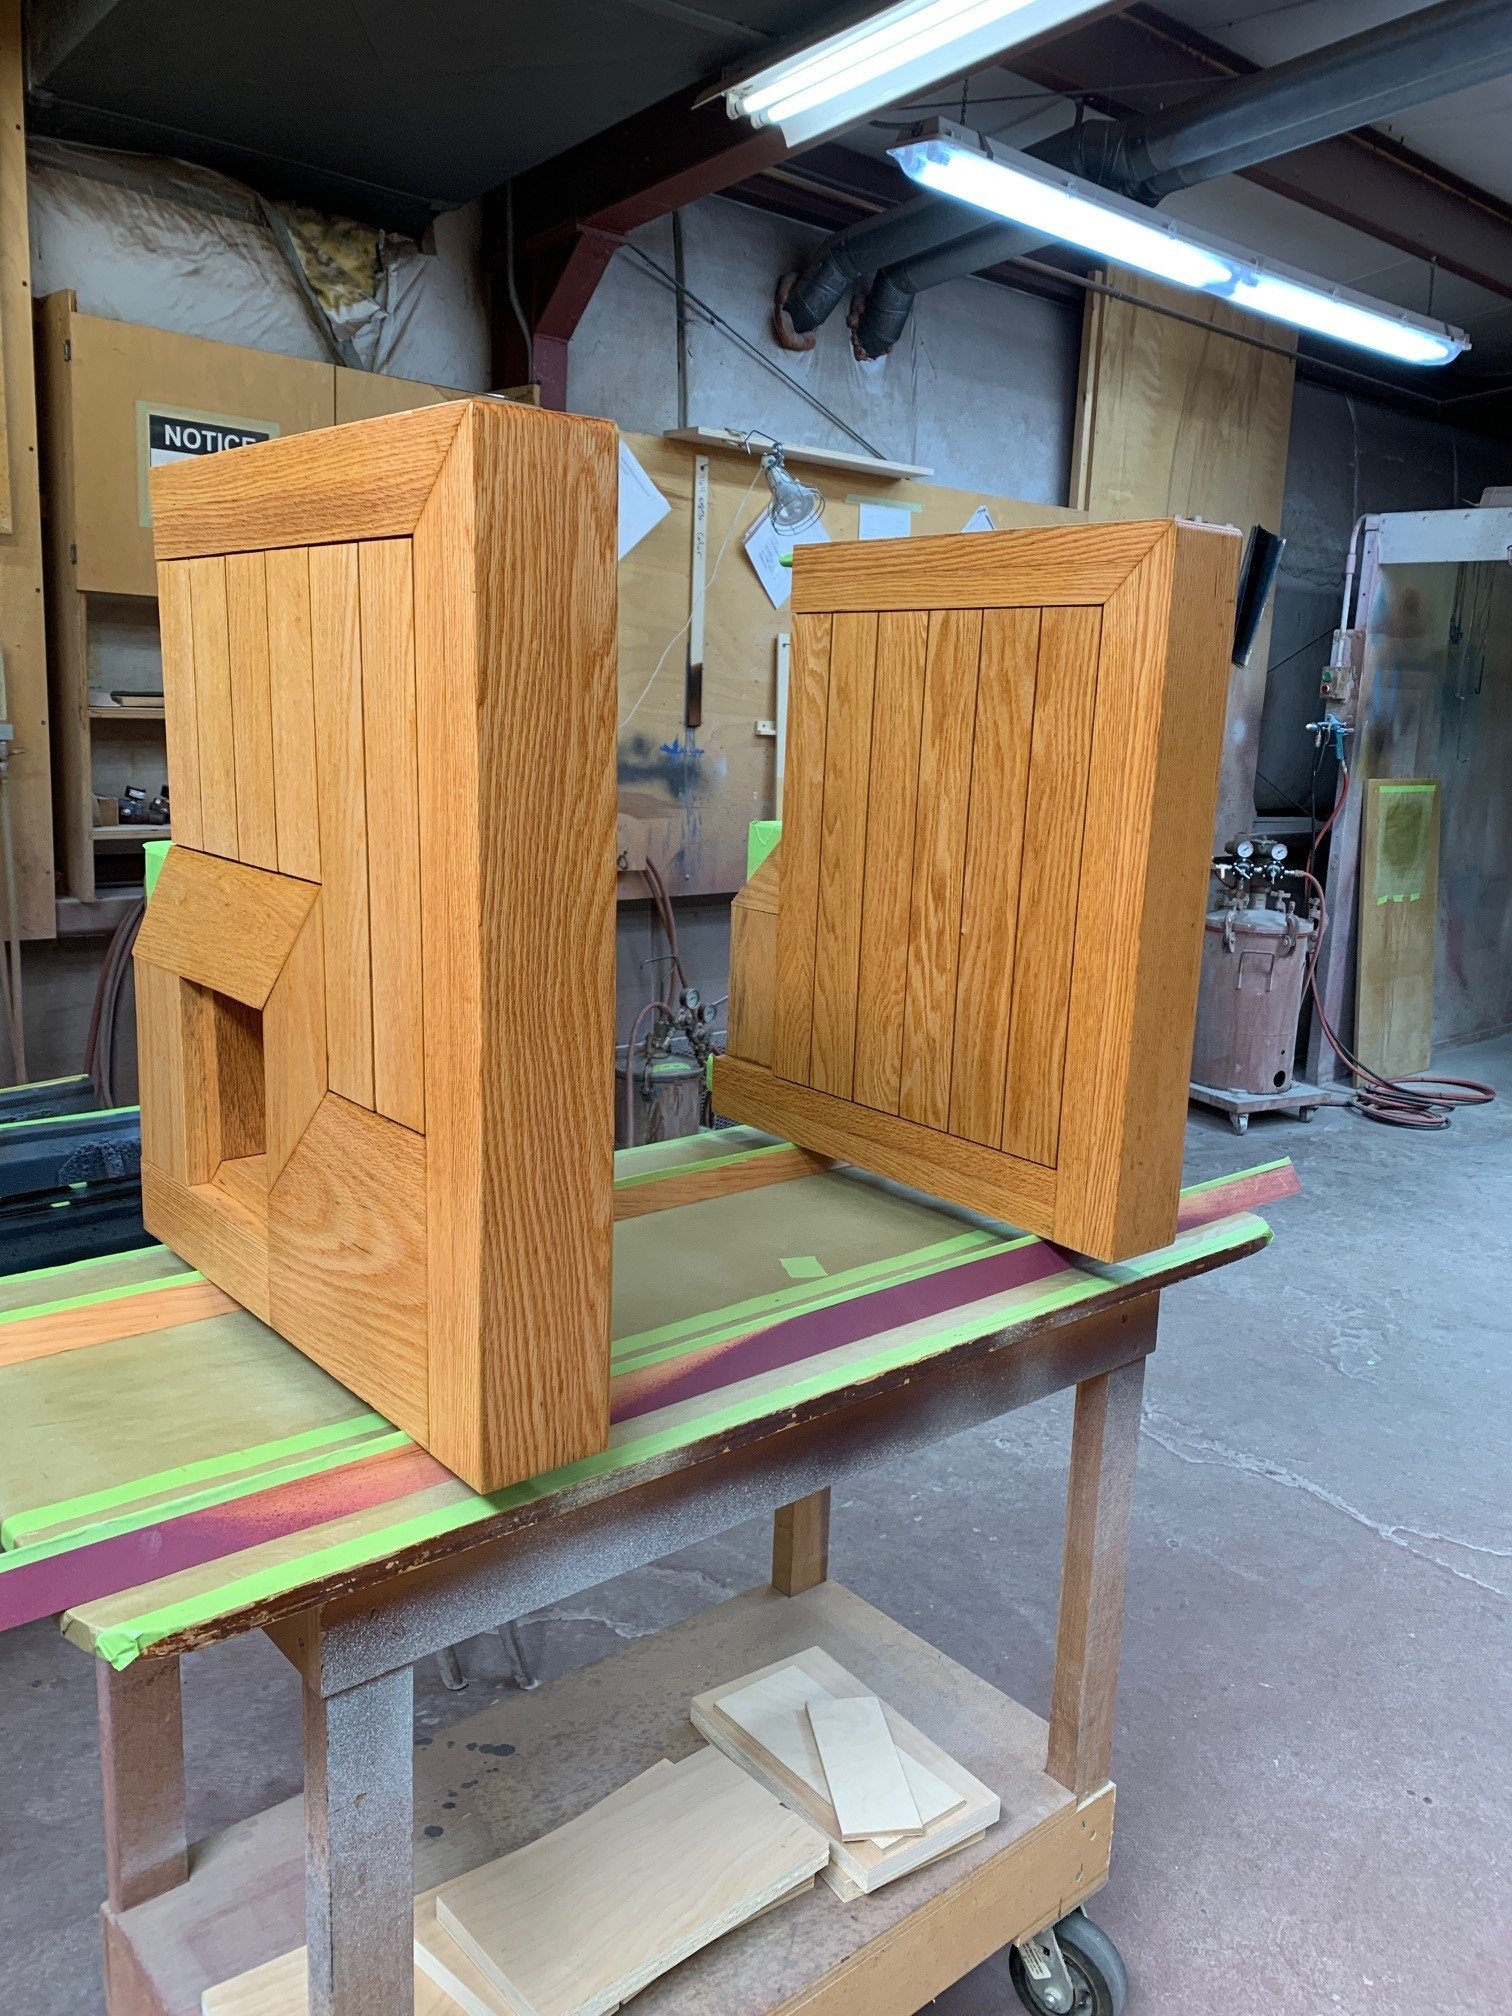   RECONSTRUCTION    June 2022 &nbsp;  As a result of the water damage, restoration was needed for the wooden console and bench. Within C.B. Fisk’s paint and finishing shop, multiple coats are added before the console is reassembled.  